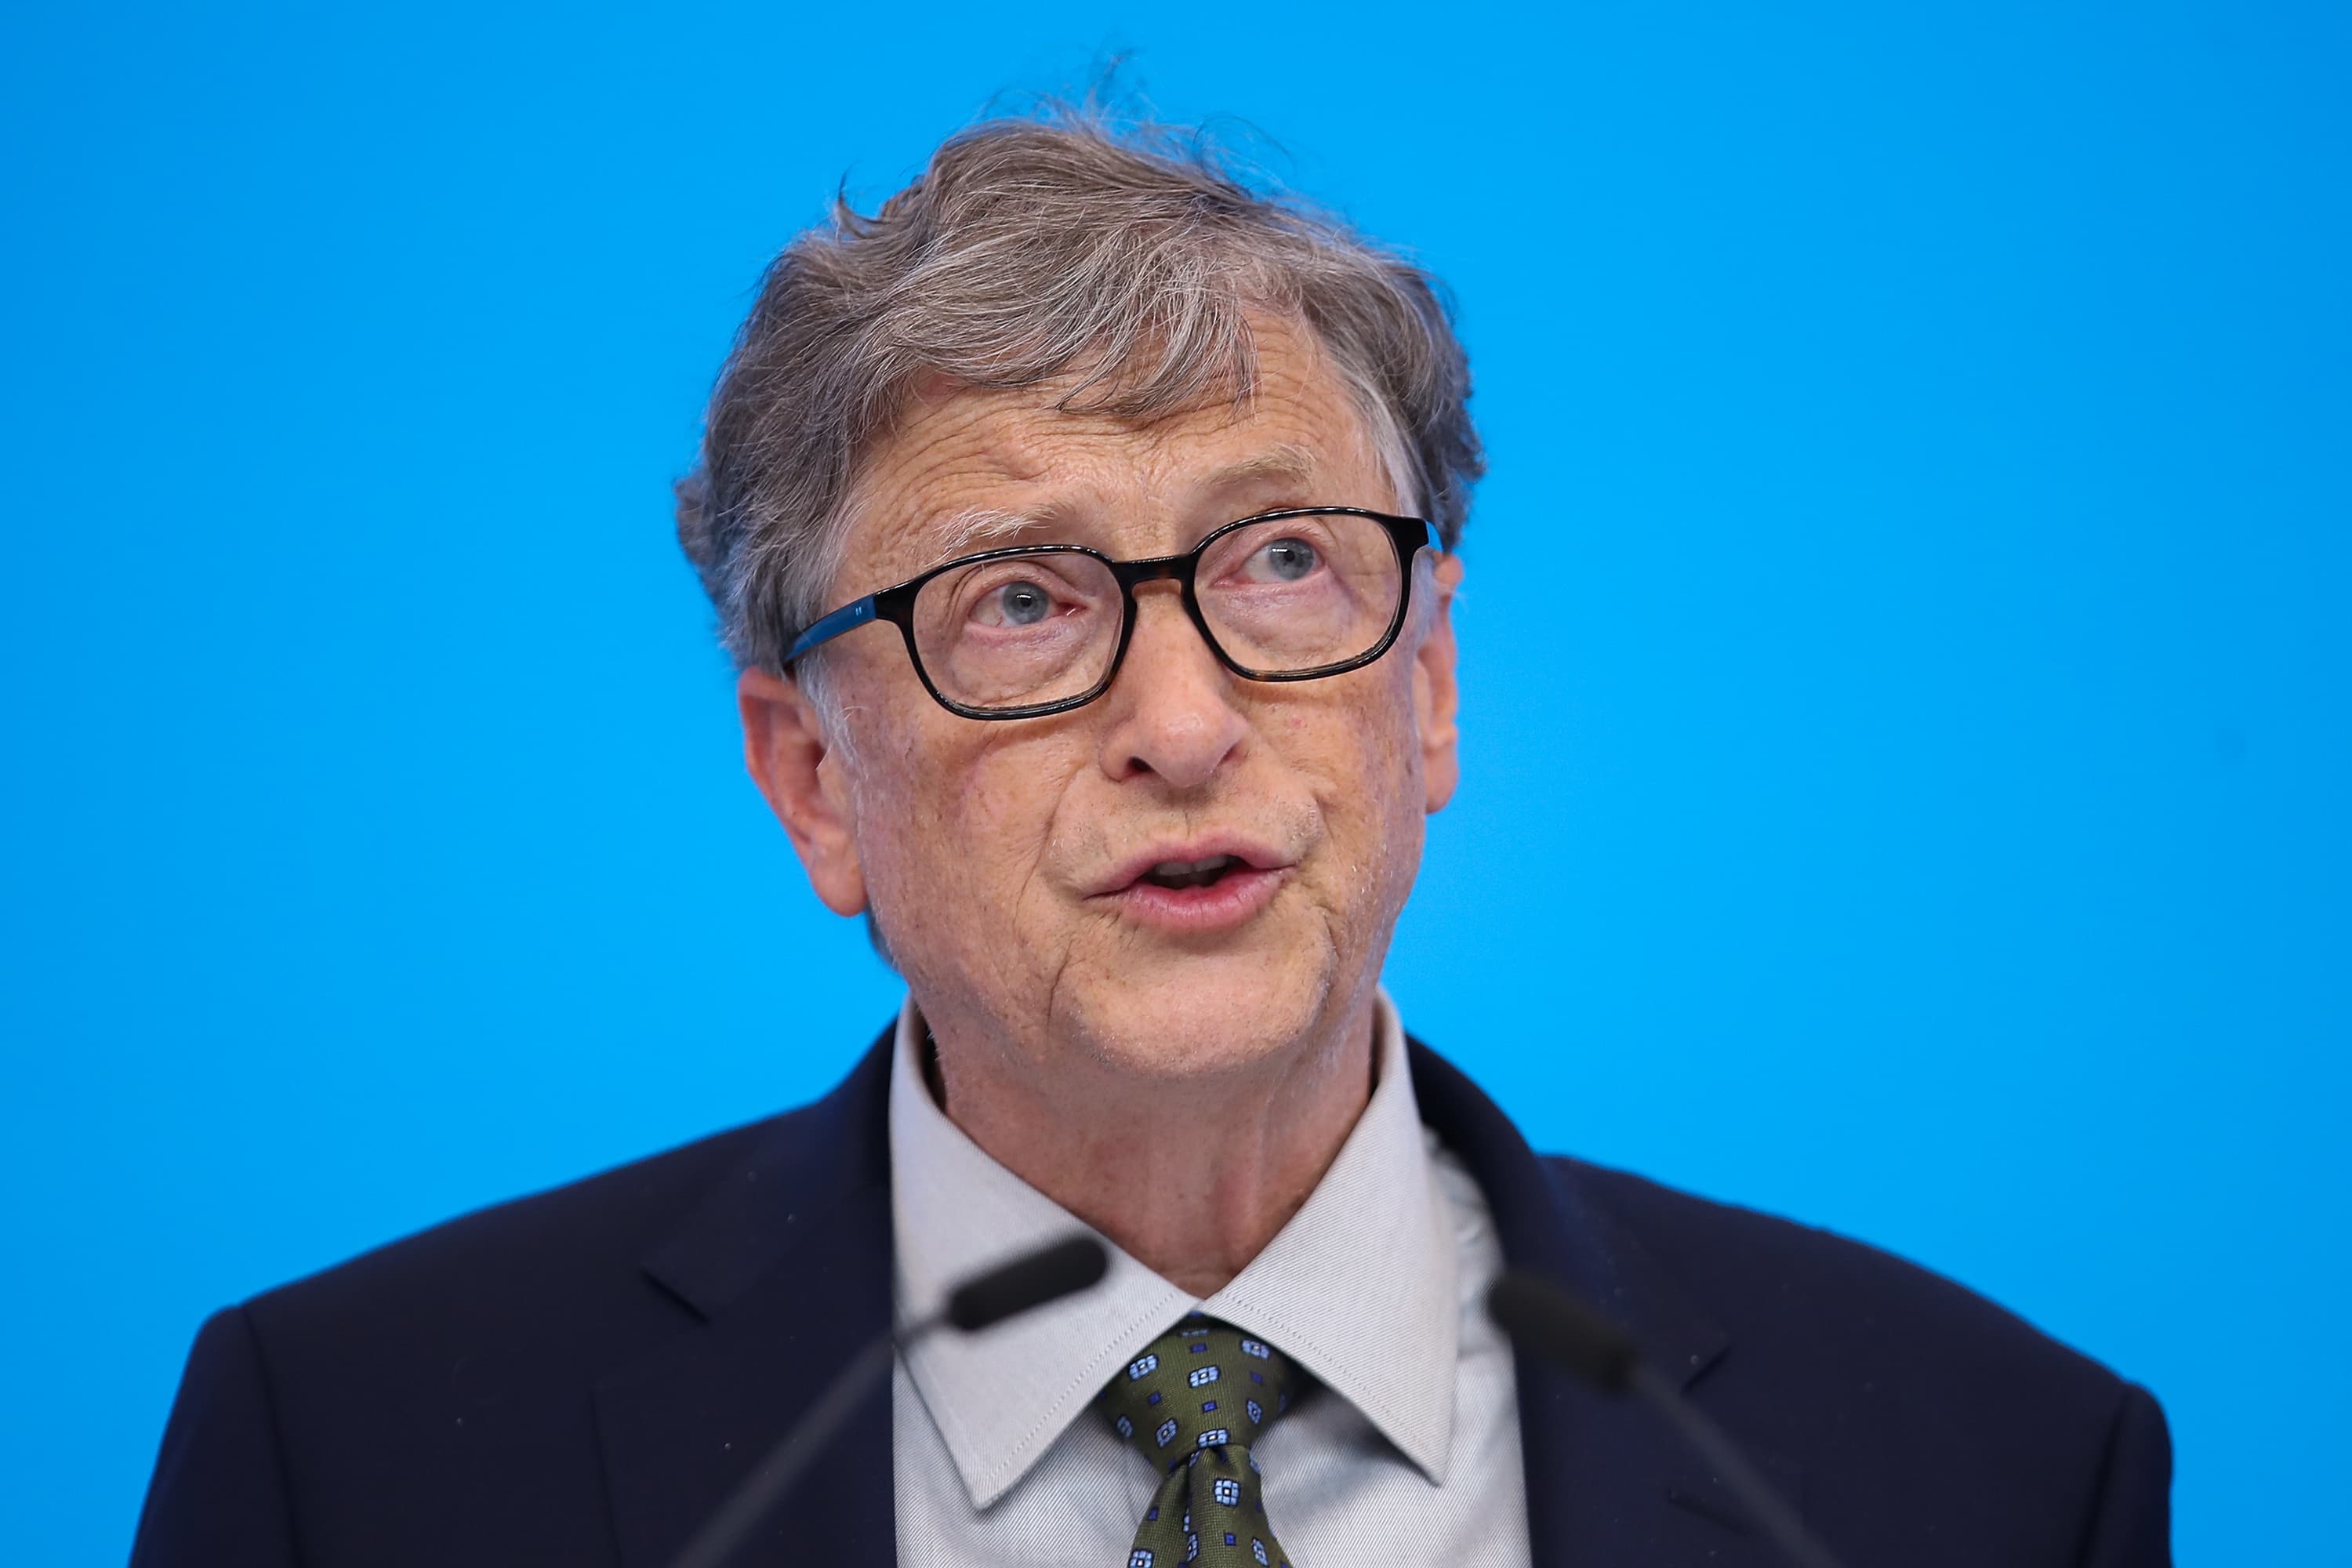 Covid's omicron variant is currently tearing through the U.S. and the rest of the world at a record-breaking pace — but Bill Gates sees hope on